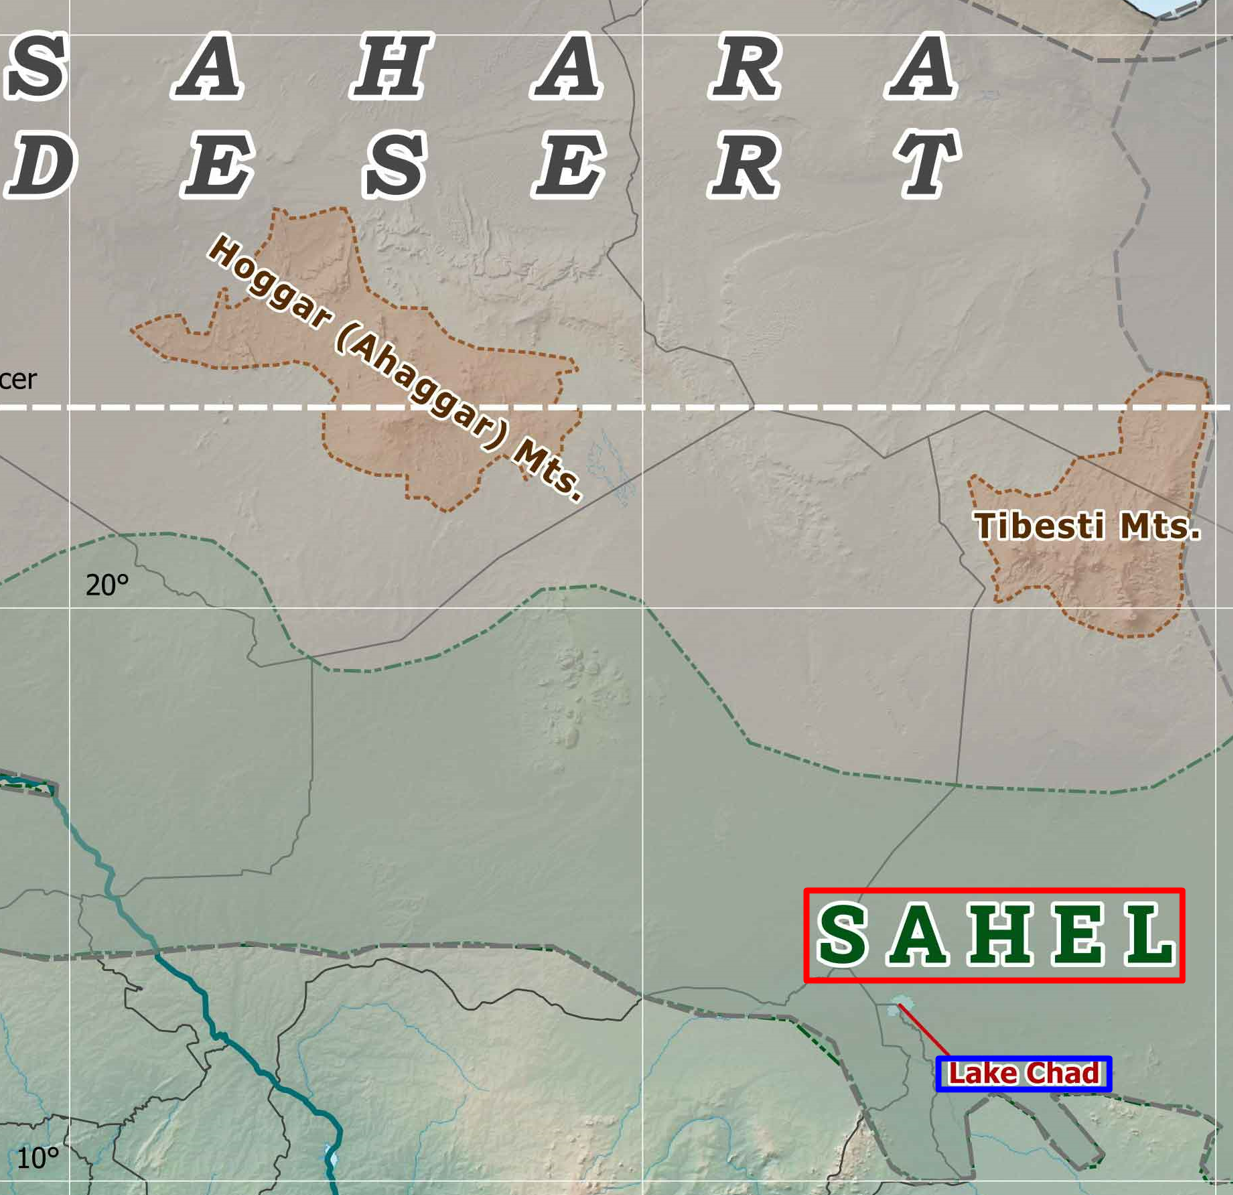 A map of the sahara desert
Description automatically generated